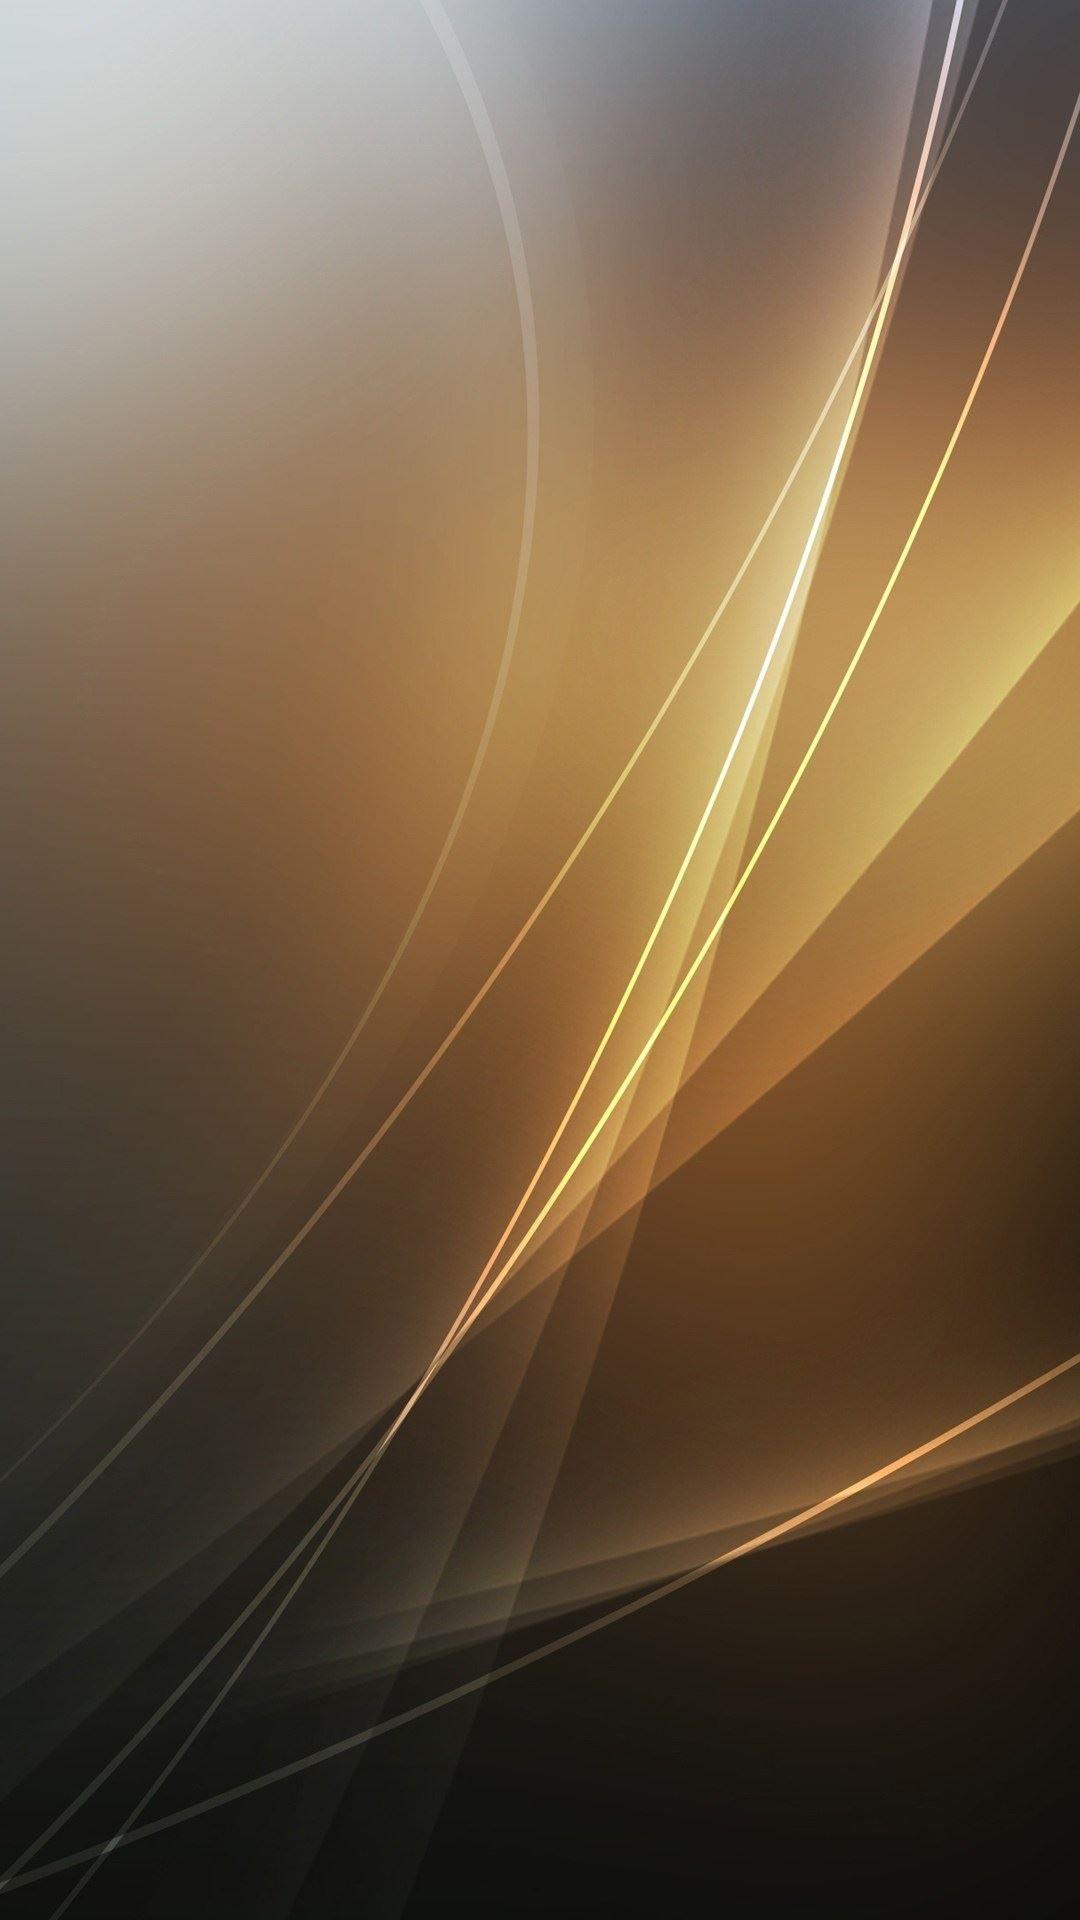 Abstract Golden Light Lines Android Wallpaper in 2019